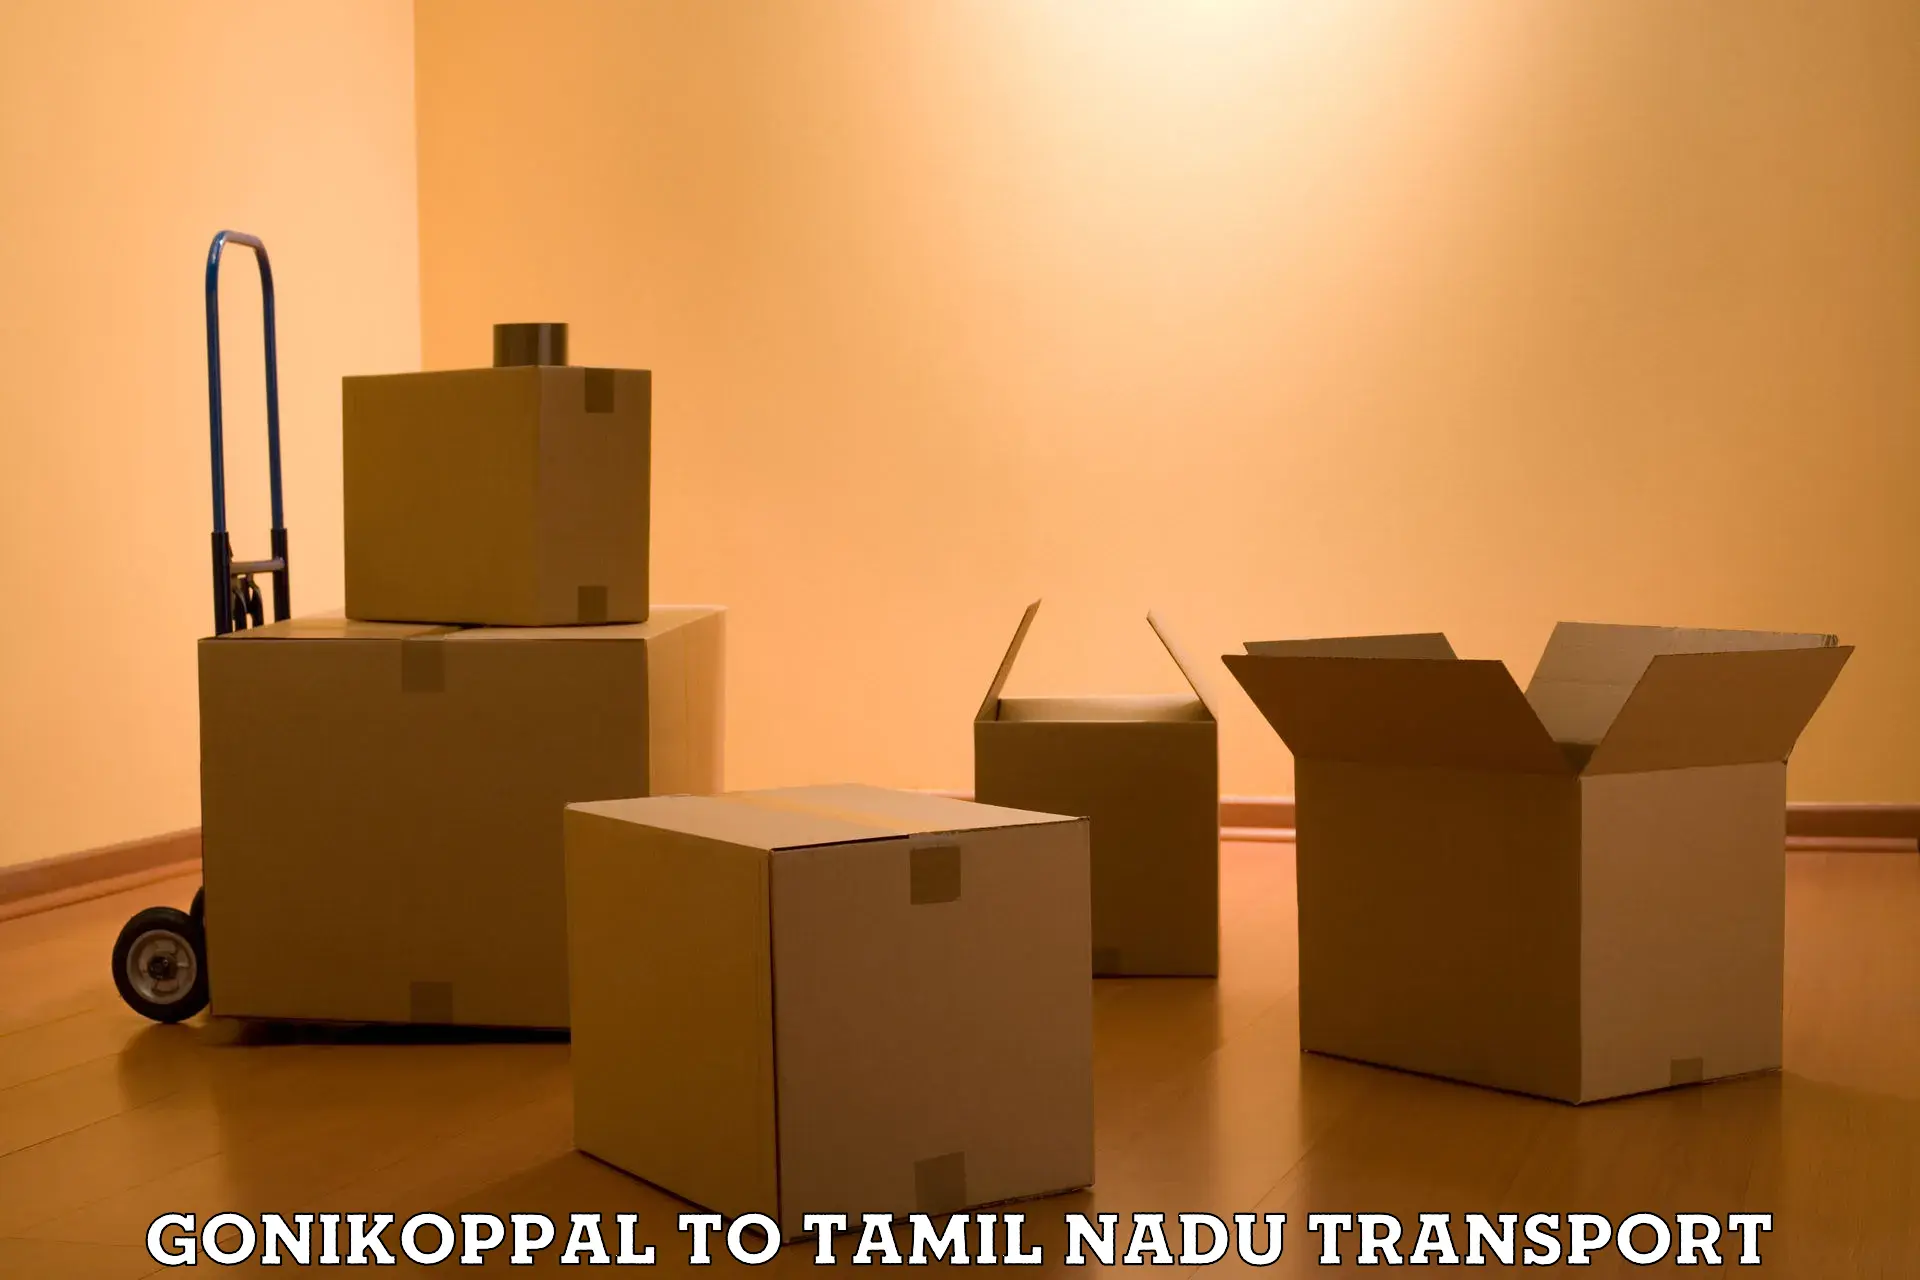 Nearby transport service Gonikoppal to Coimbatore